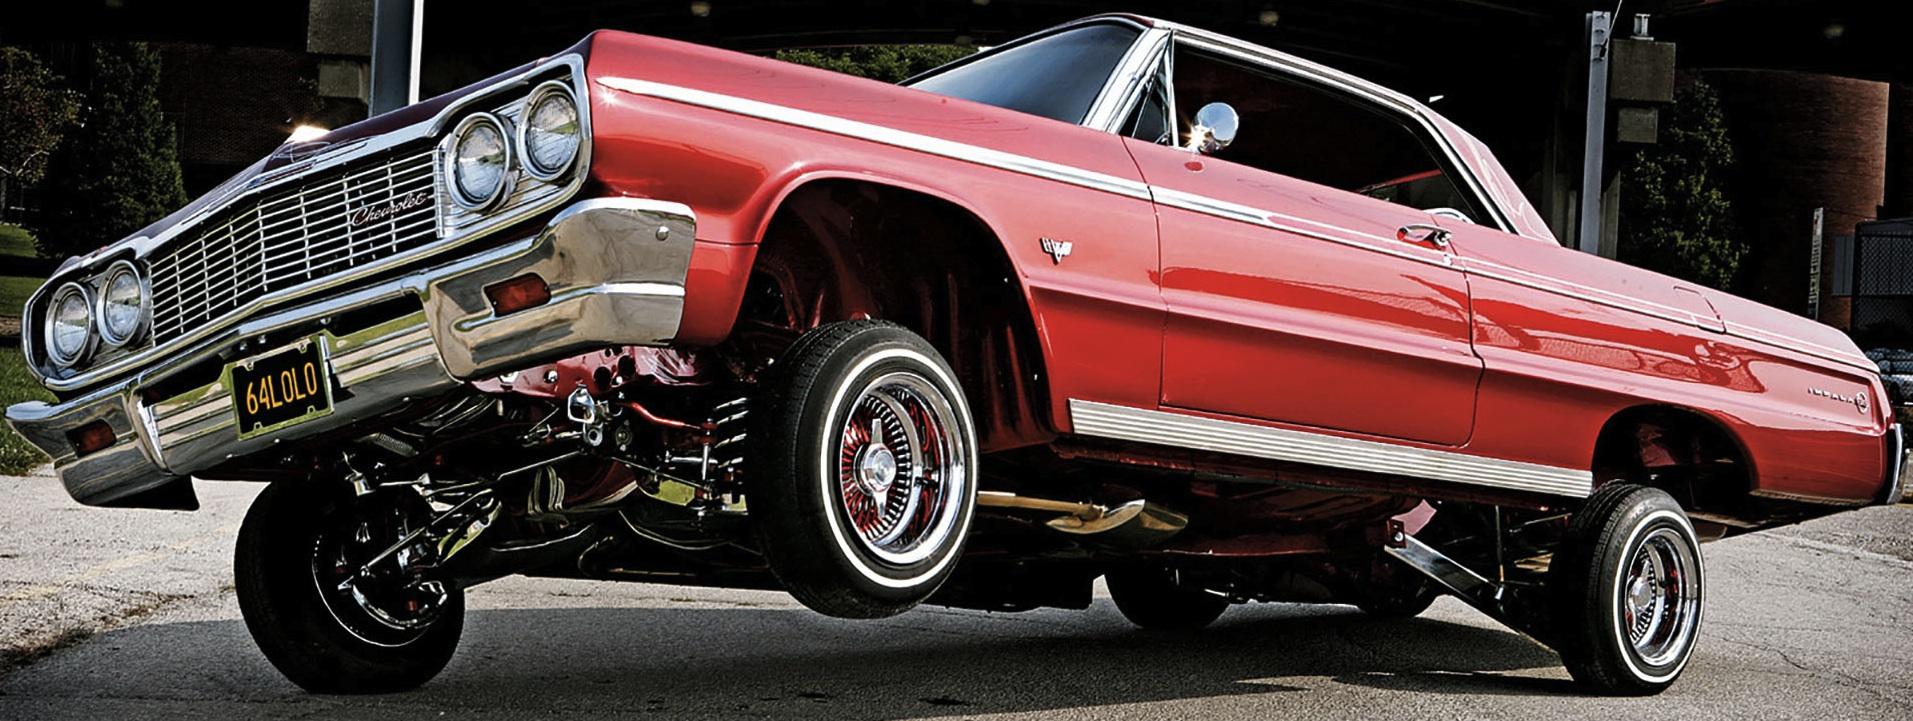 Animals For 1964 Chevy Impala Lowrider Wallpaper | HD Wallpapers Range